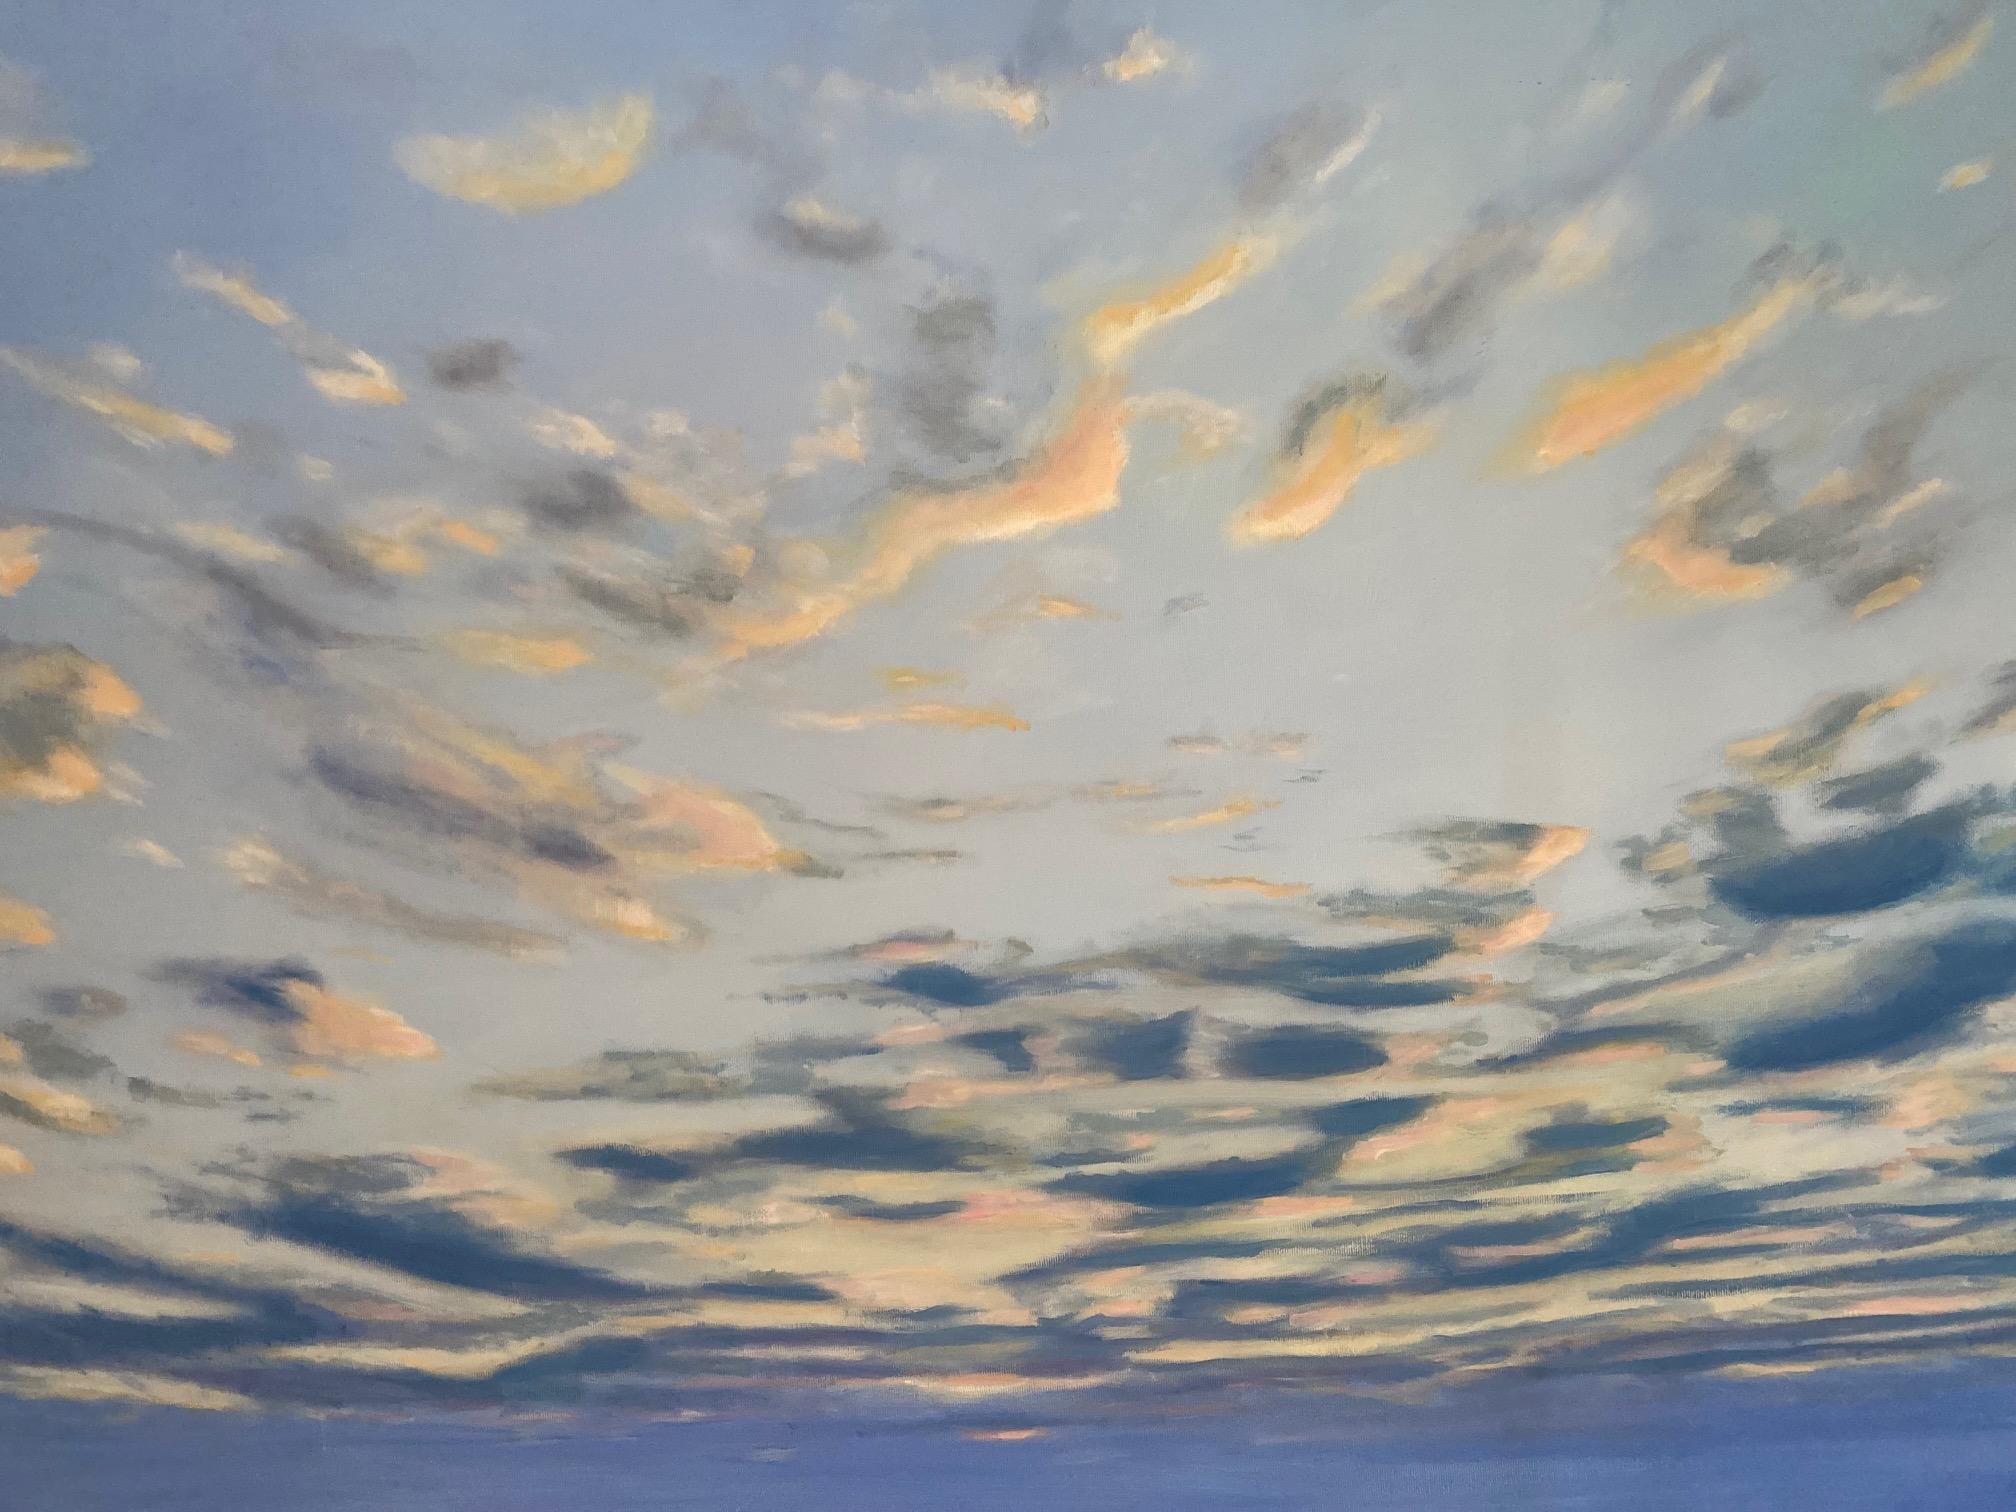 Sky - contemporary figurative landscape painting of luminescent sky  - Painting by Michael Pröpper